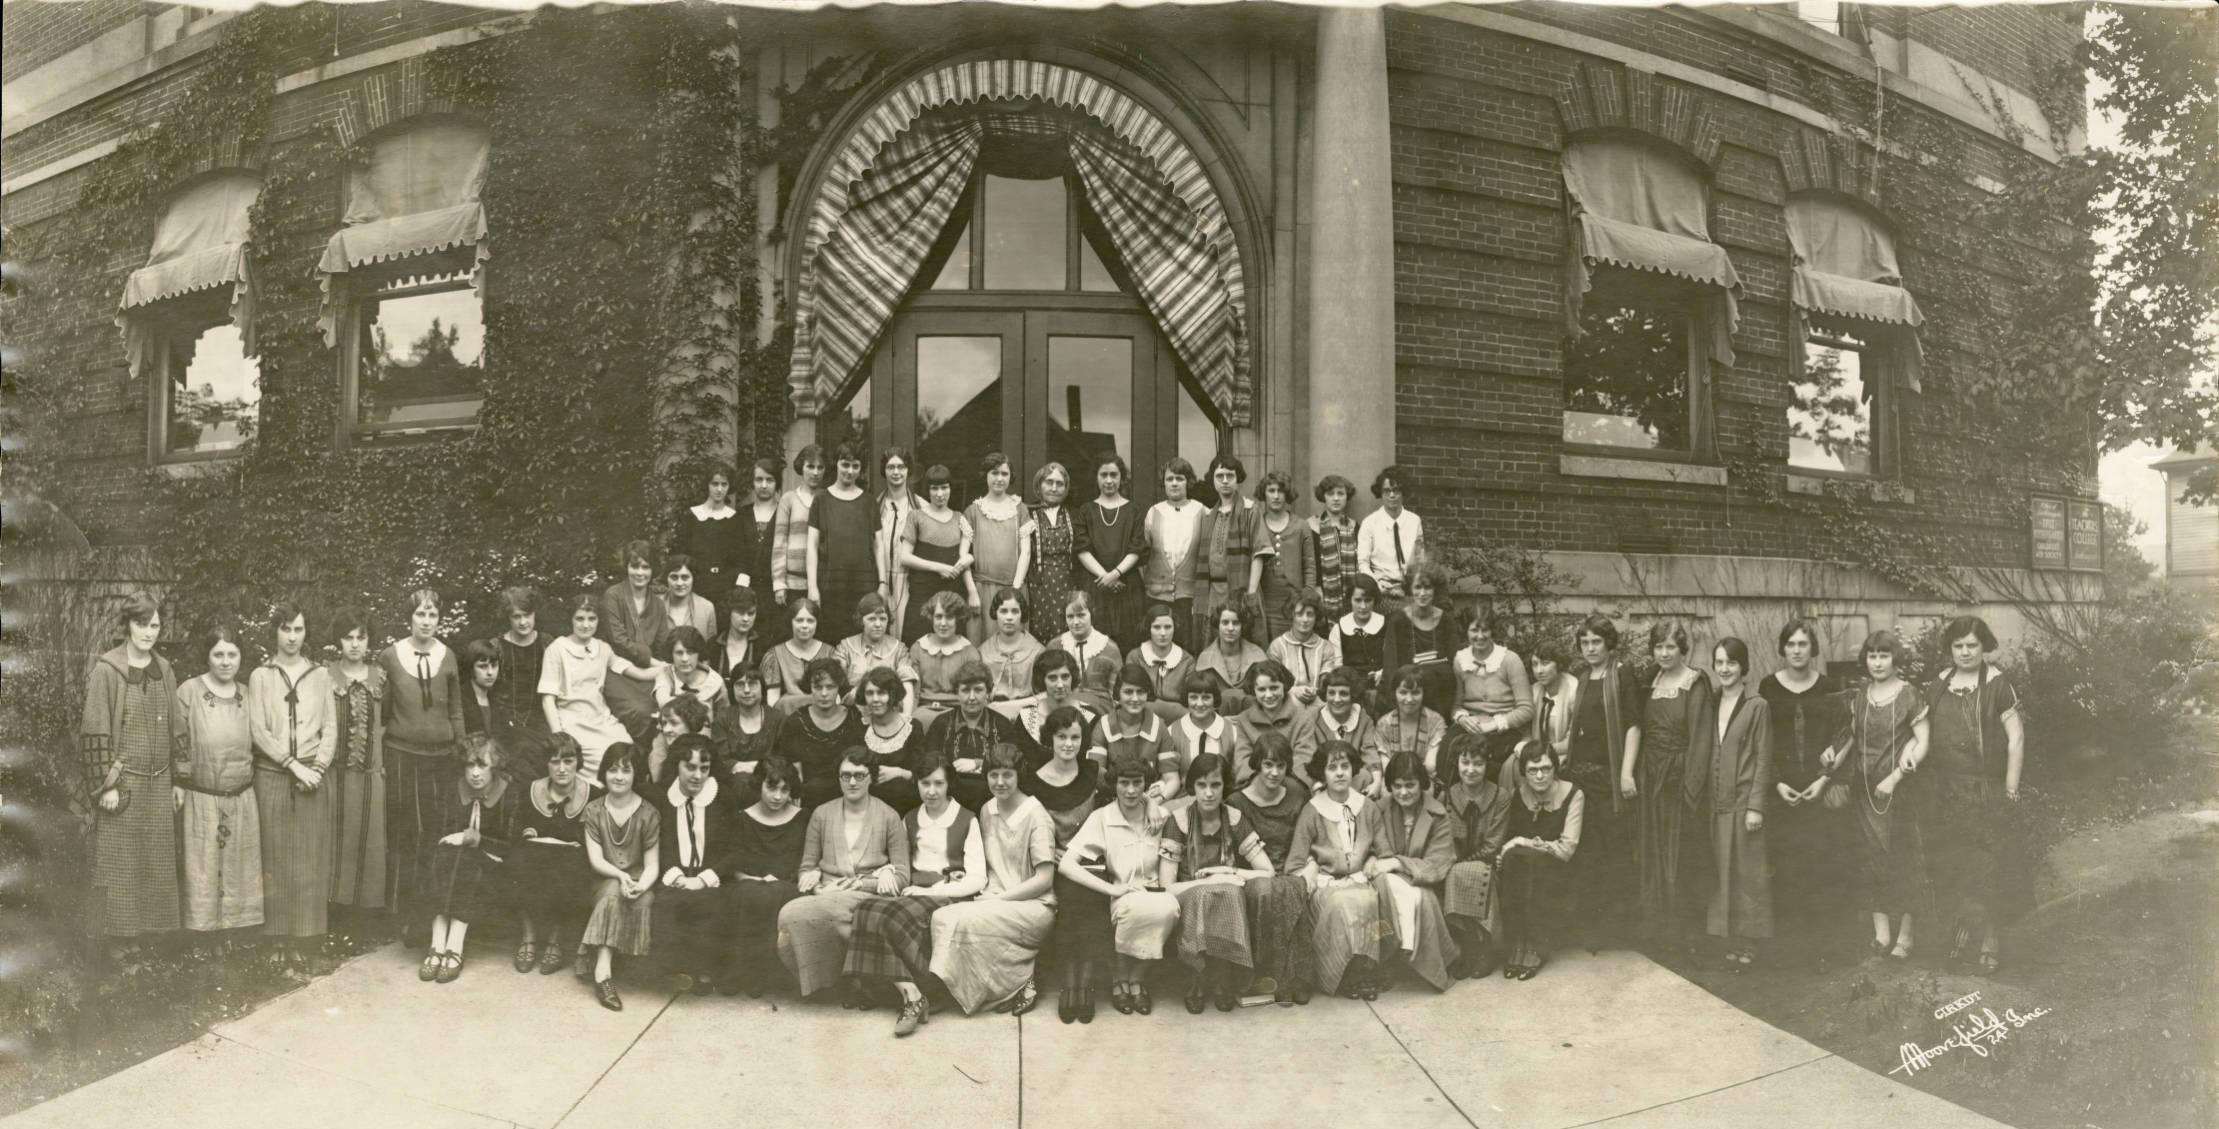 A group of young women are gathered on the steps in front of a school building. 